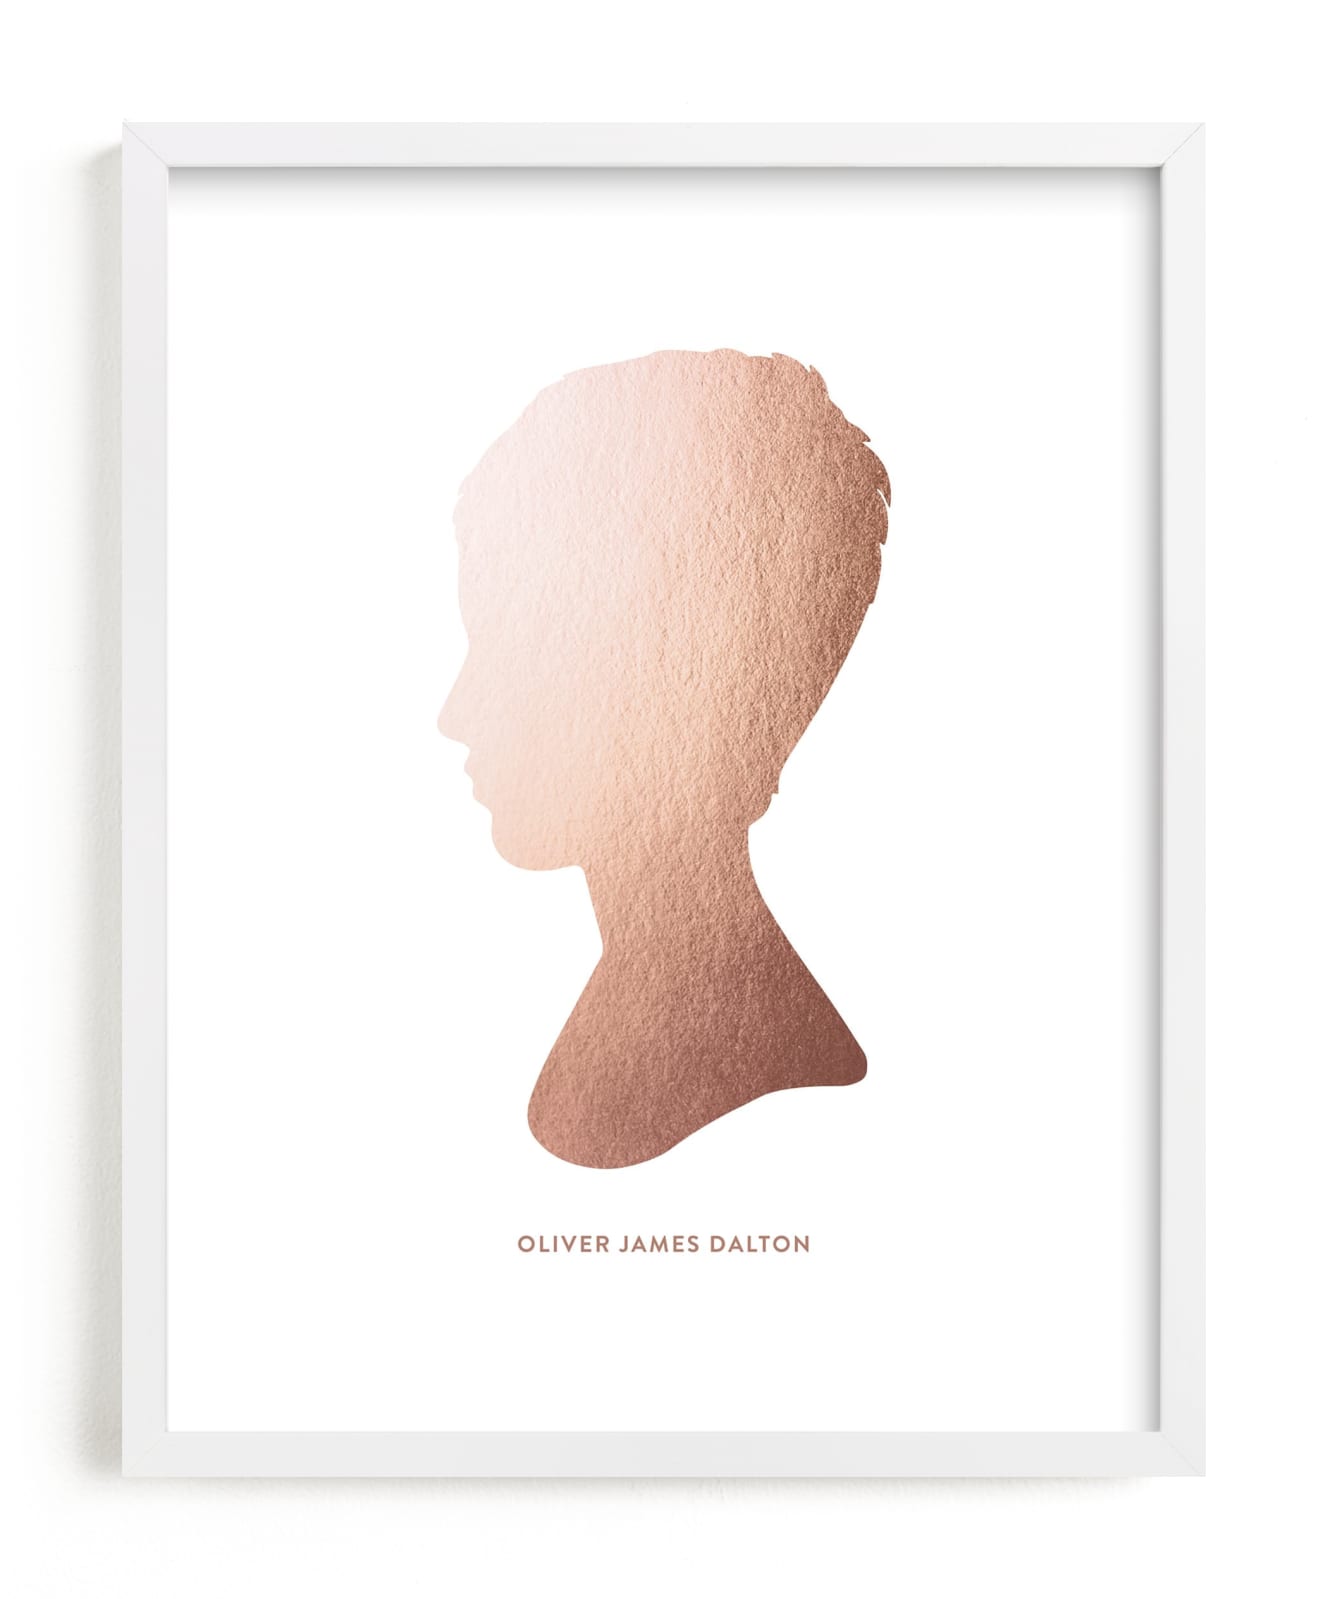 This is a rosegold silhouette art by Minted called Silhouette Foil  Art.